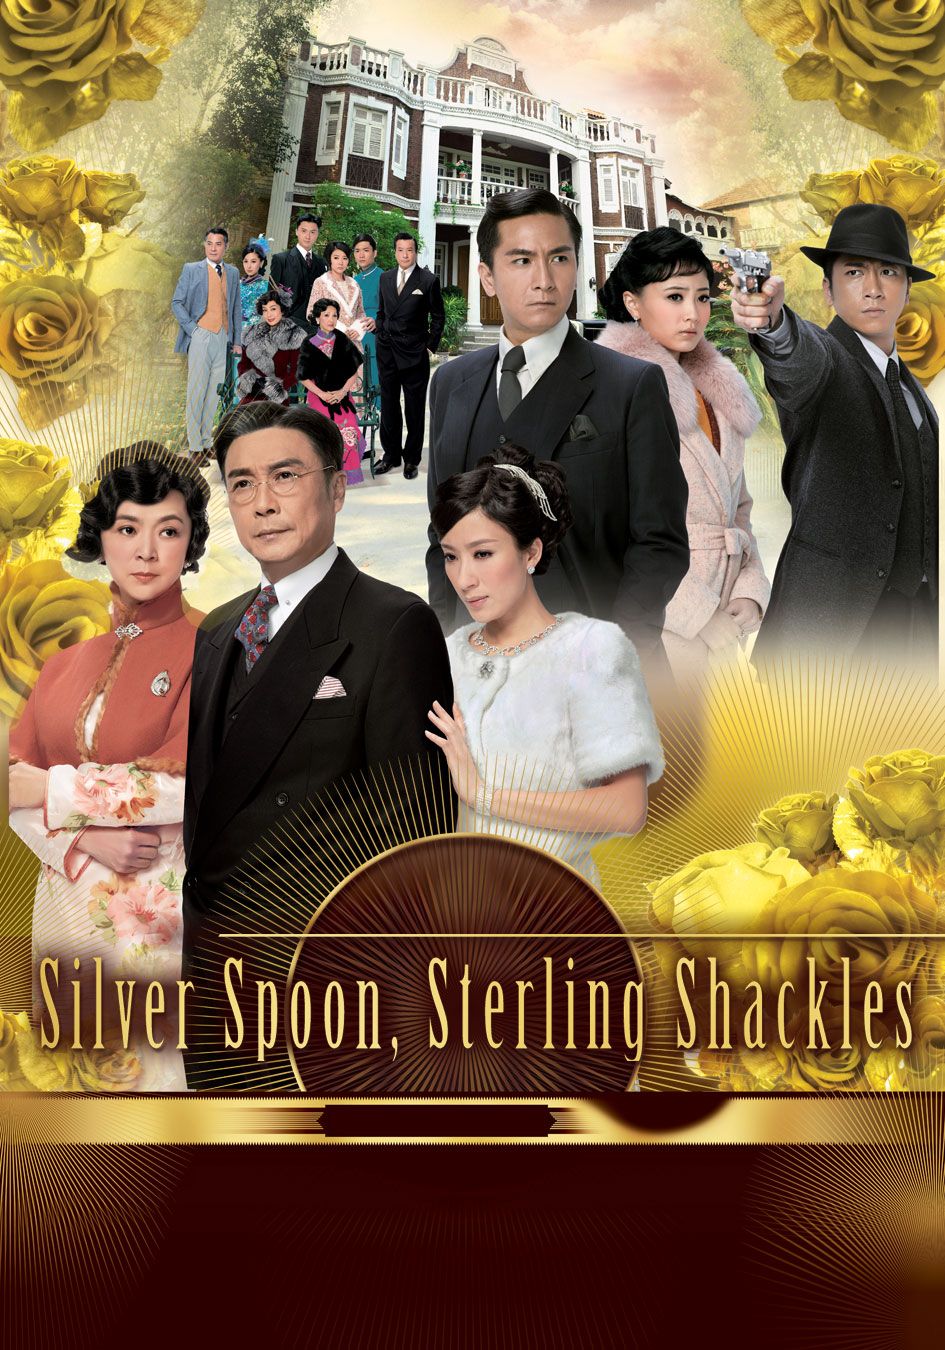 Silver Spoon, Sterling Shackles-名媛望族